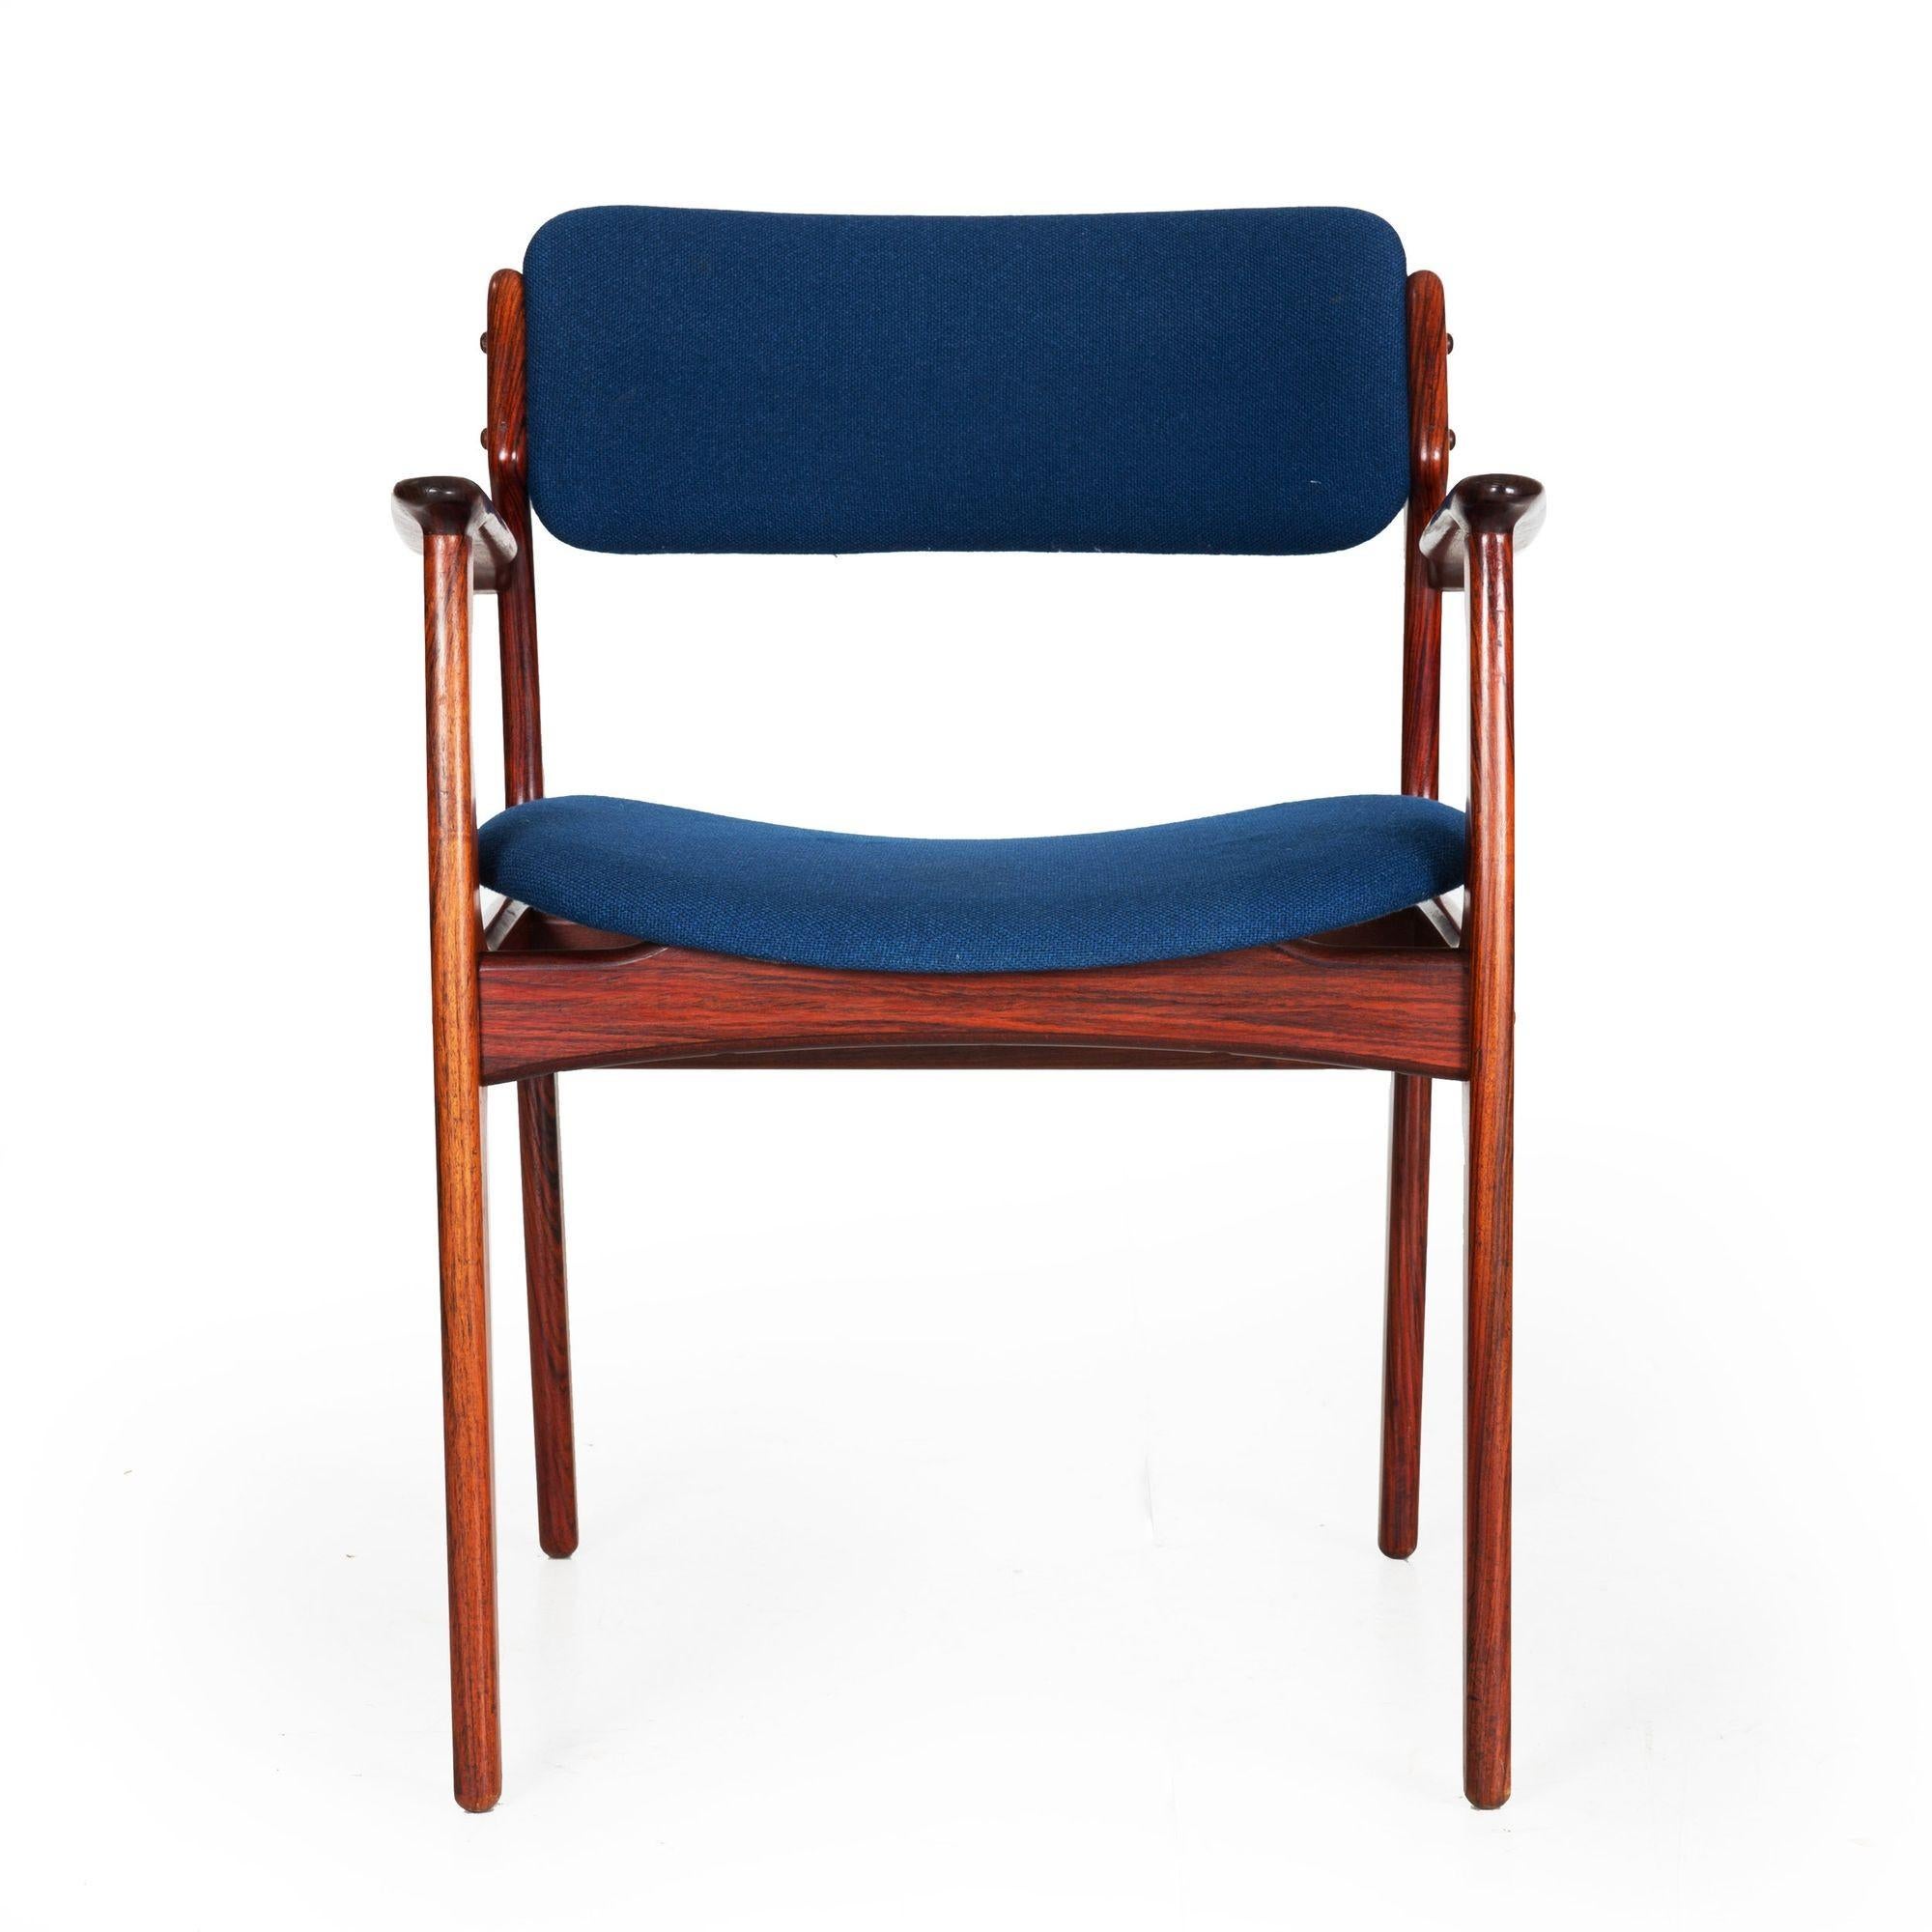 ROSEWOOD MODEL 50 ARM CHAIR BY ERIK BUCH
Denmark  produced by OD Møbler, circa 1960/70s  several available
Item # 209WKA27P-1 

The iconic sculptural 